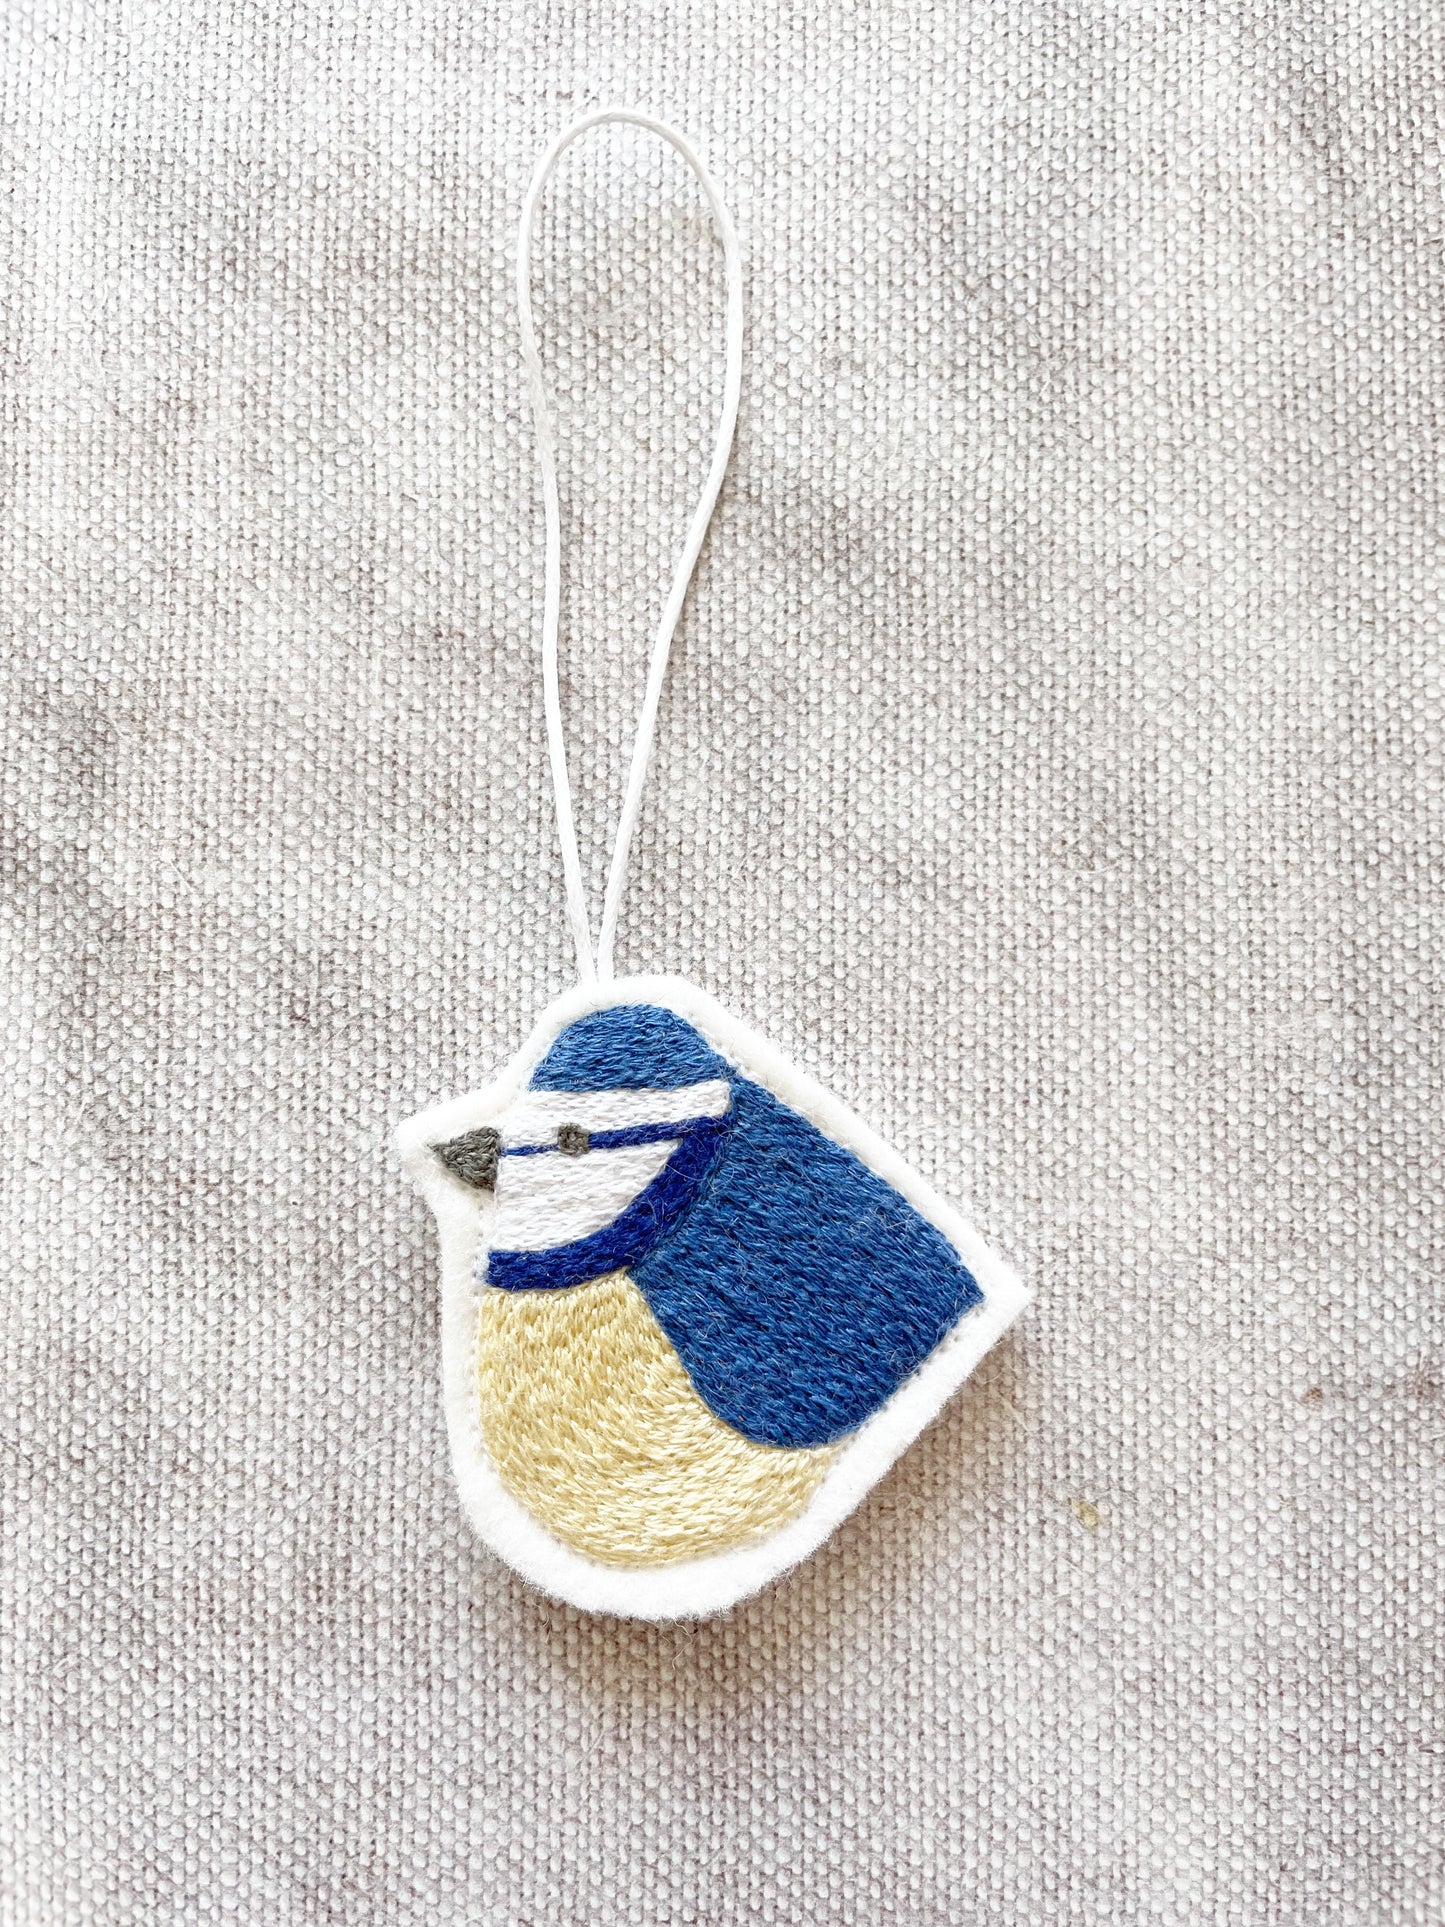 Hand Embroidered Blue Tit Decoration